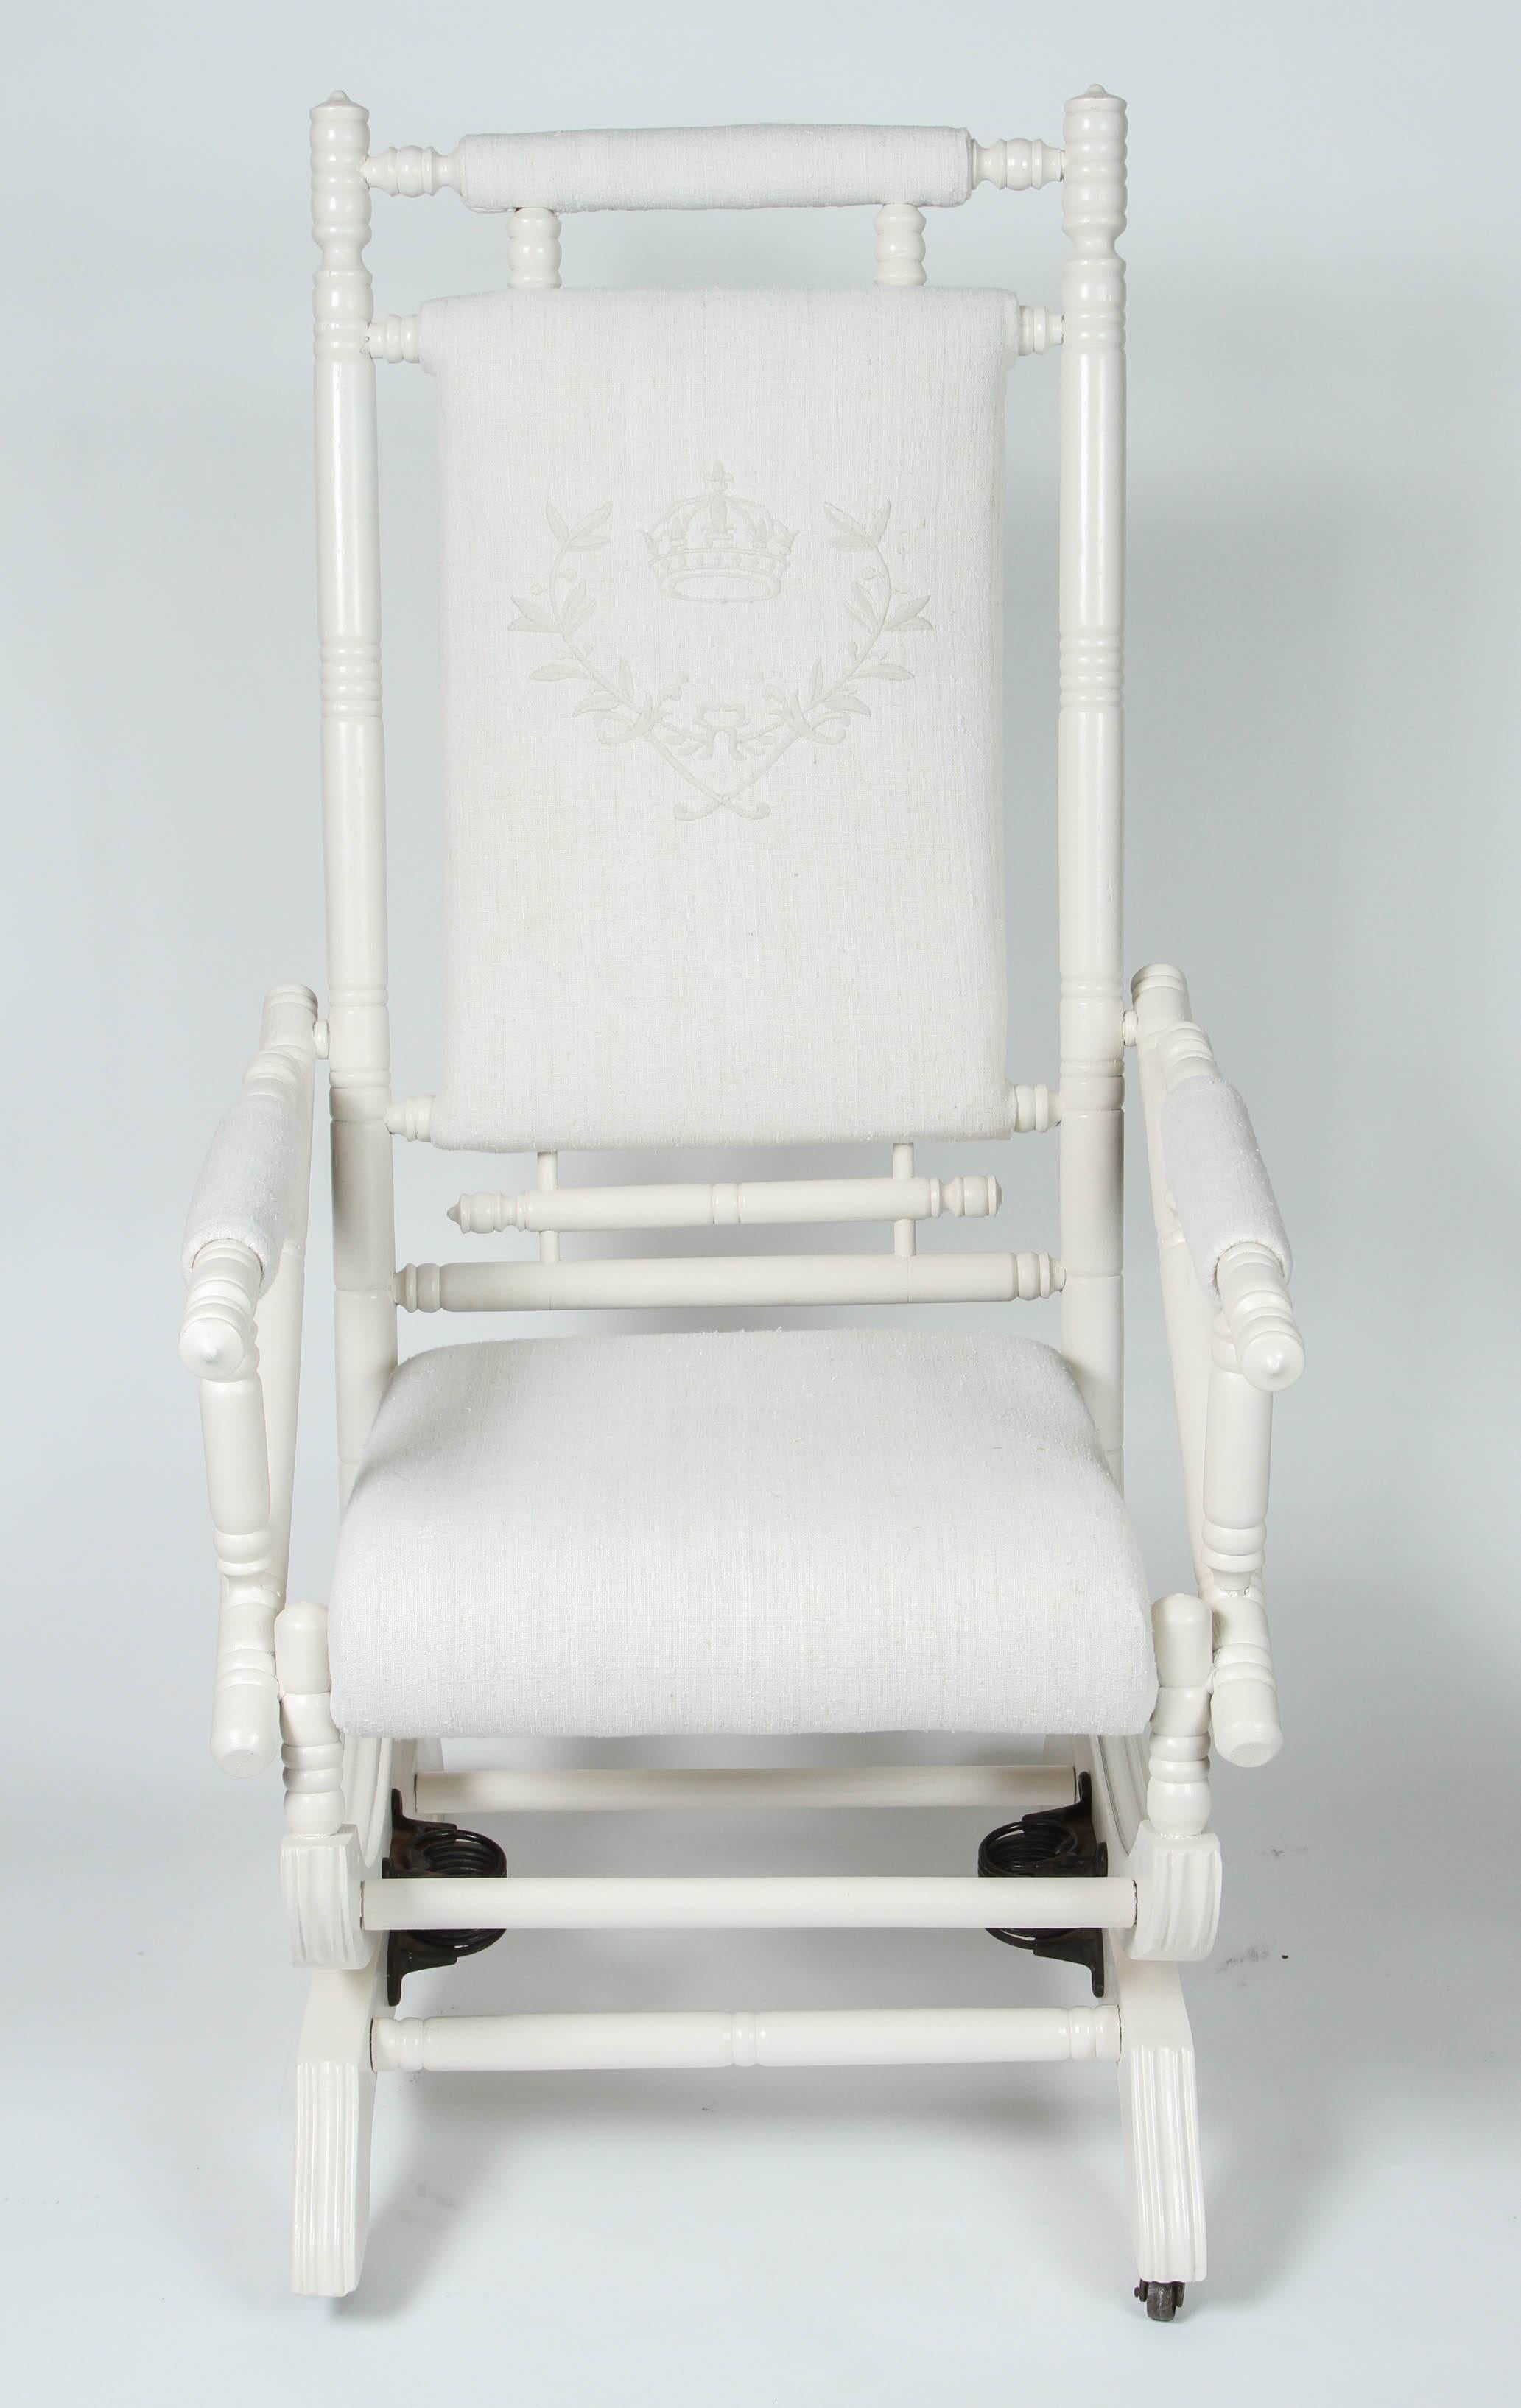 Antique spring rocking chair with new painted finish. Has been newly upholstered in Vintage linen, where seat back has been custom embroidered with crown and crest.